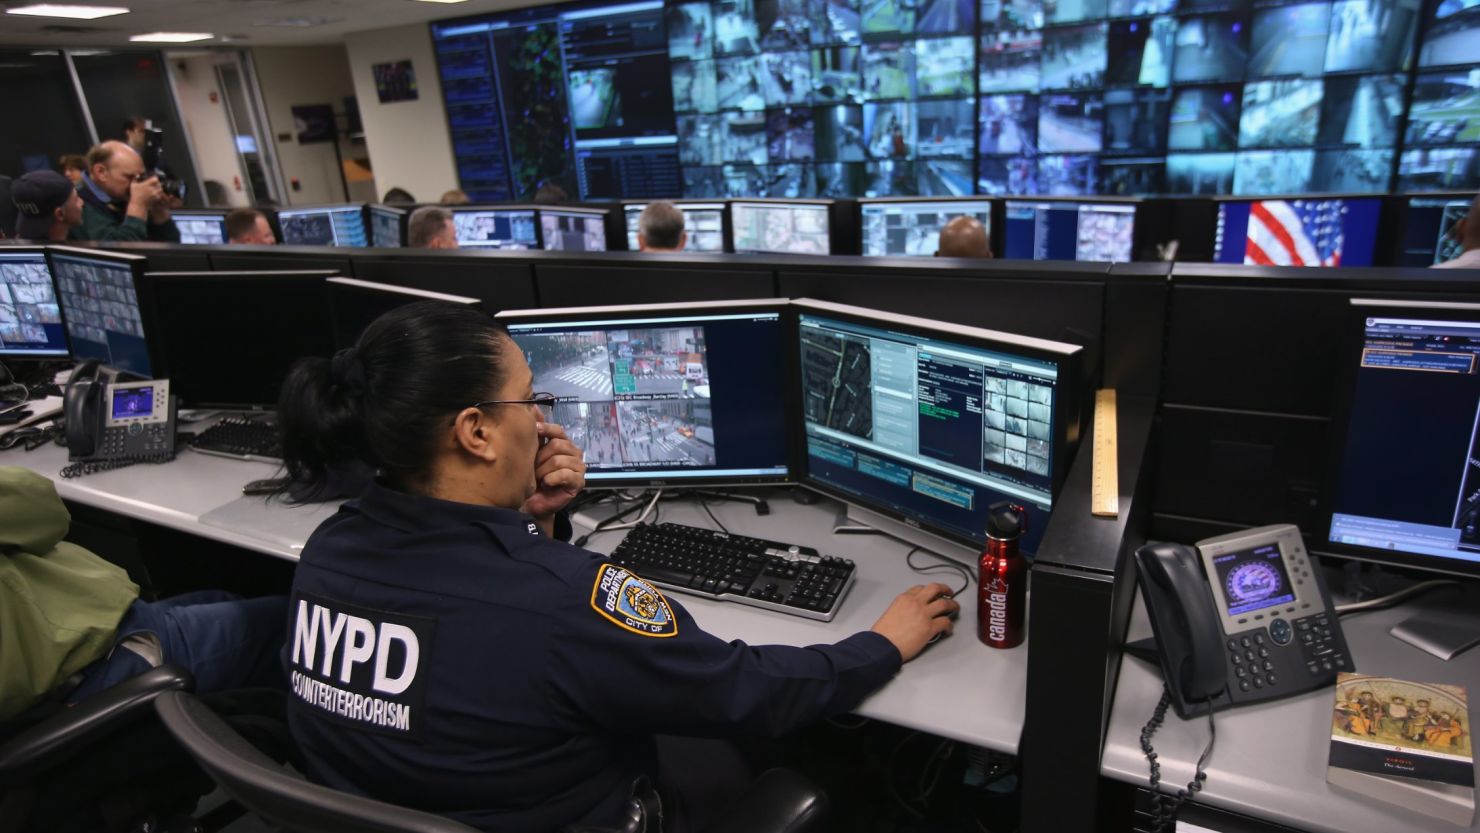 Police monitor security cameras at the Lower Manhattan Security Initiative on April 23, 2013 in New York City.